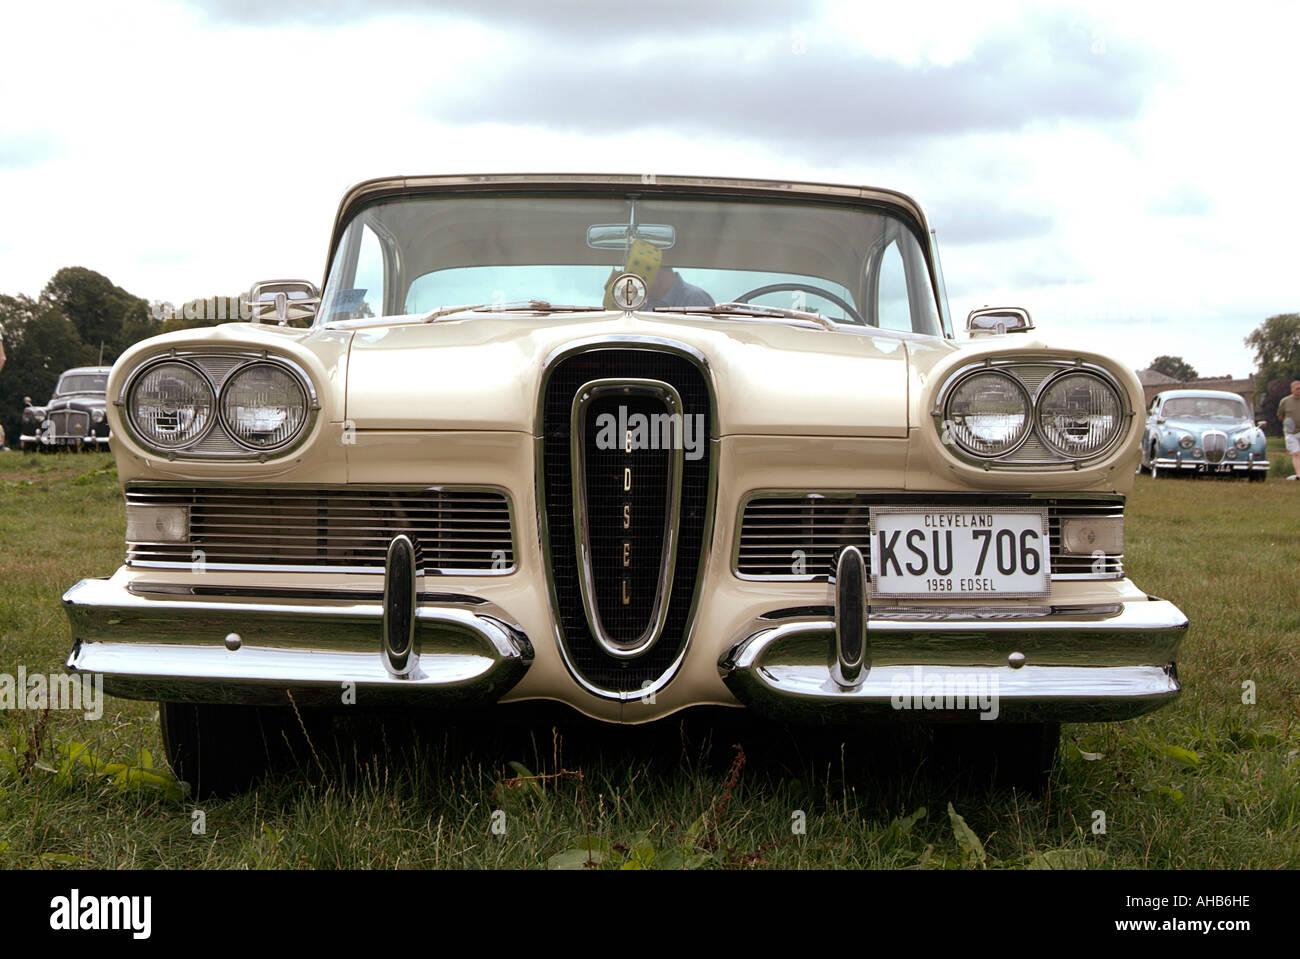 Ford Edsel Grill High Resolution Stock Photography and Images - Alamy